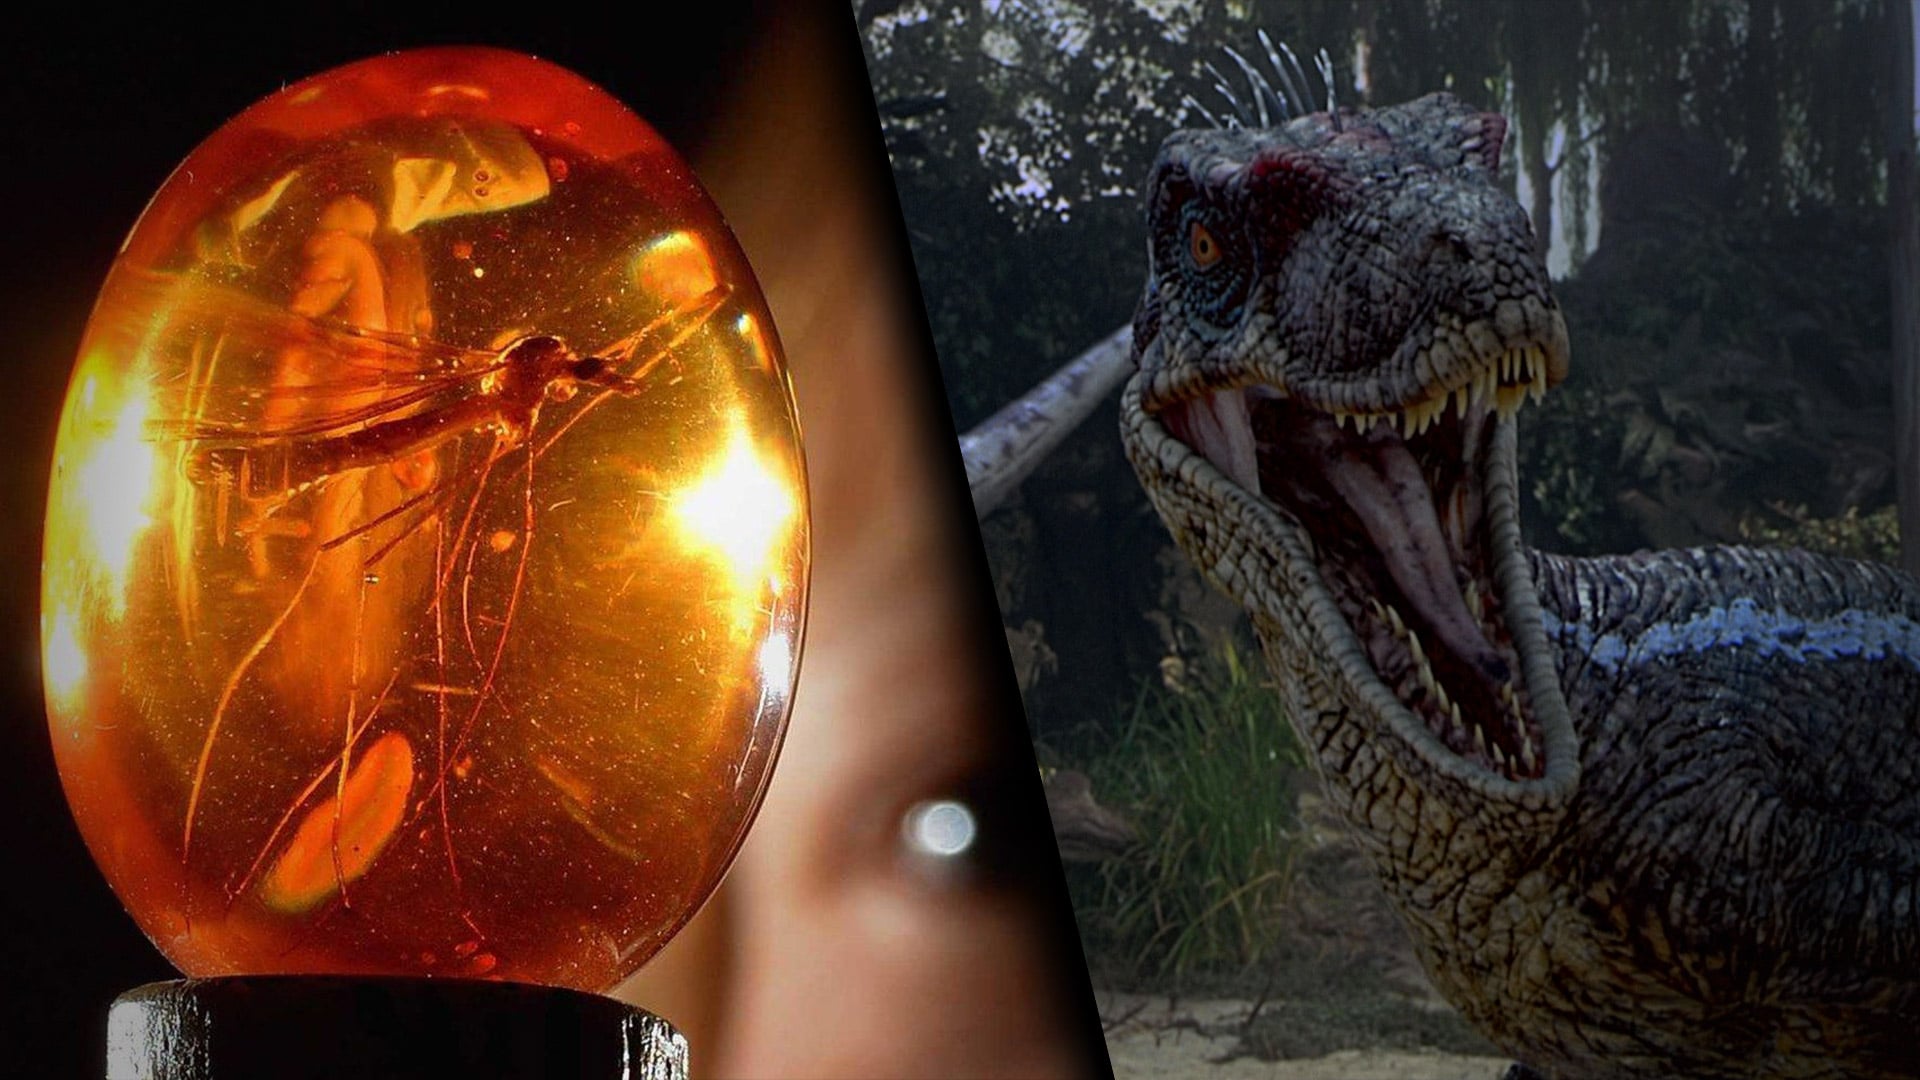 Jurassic Park: 10 Hidden Details About the Movies Spielberg Hid From of Us